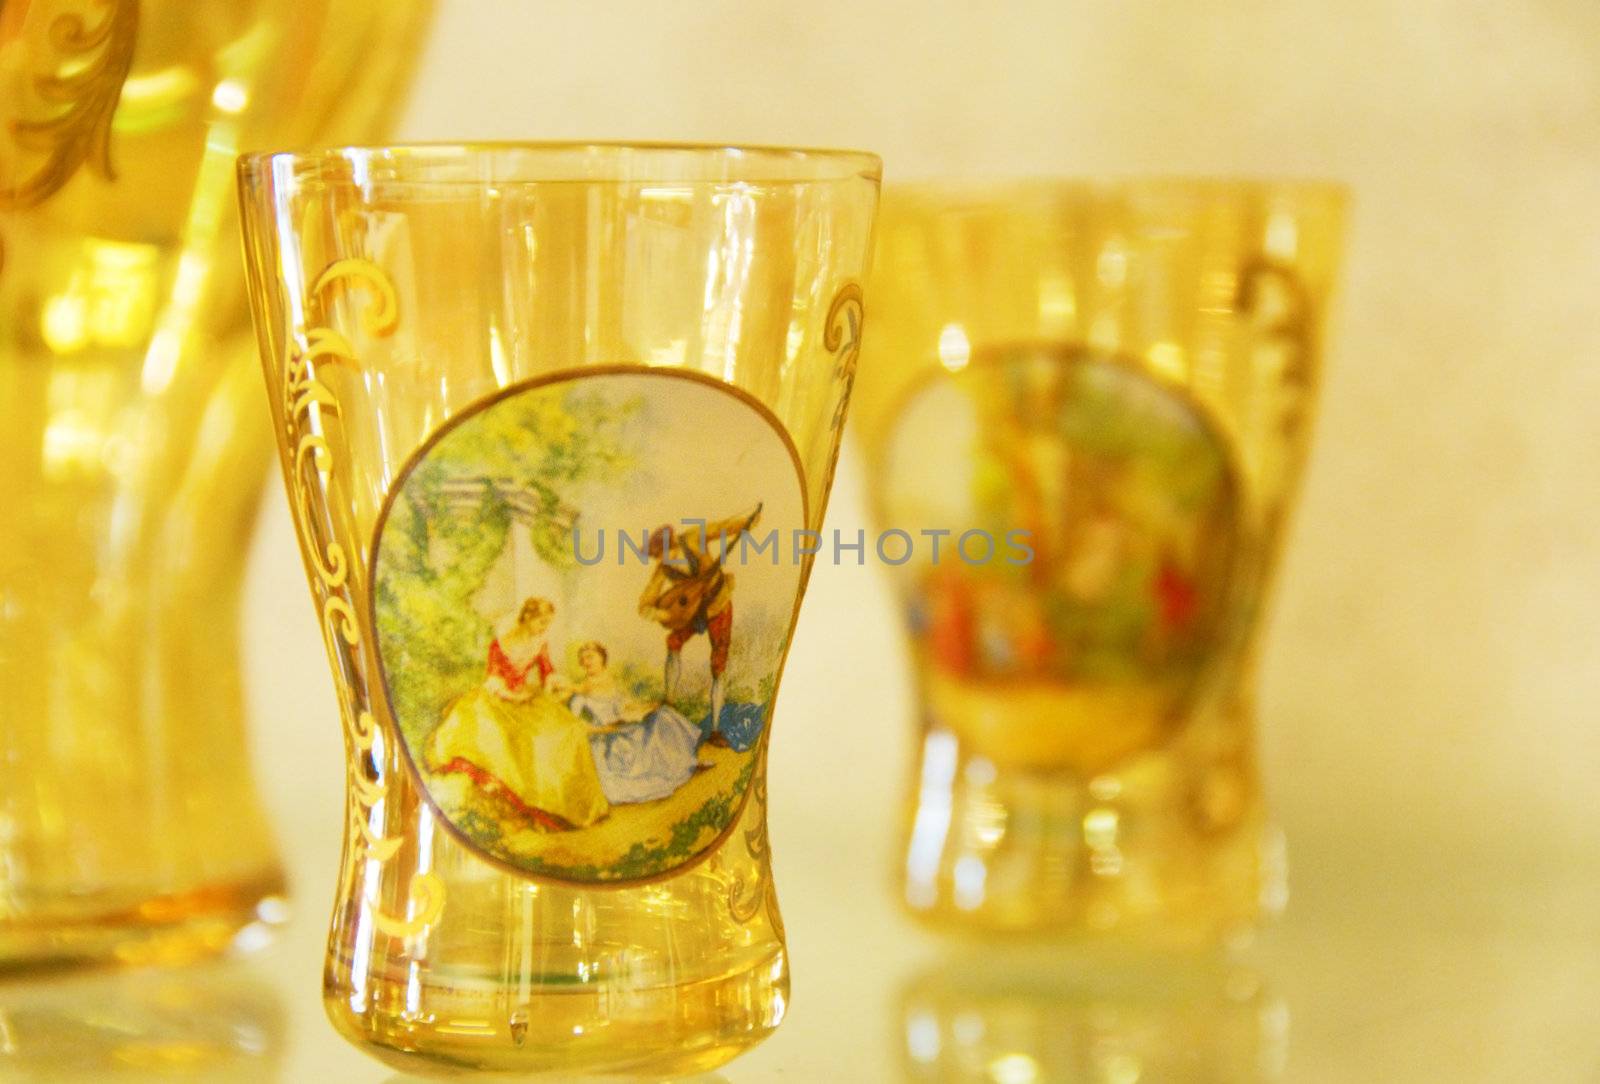 Transparent gold hand-made glass covered with drawing. Shallow depth-of-field